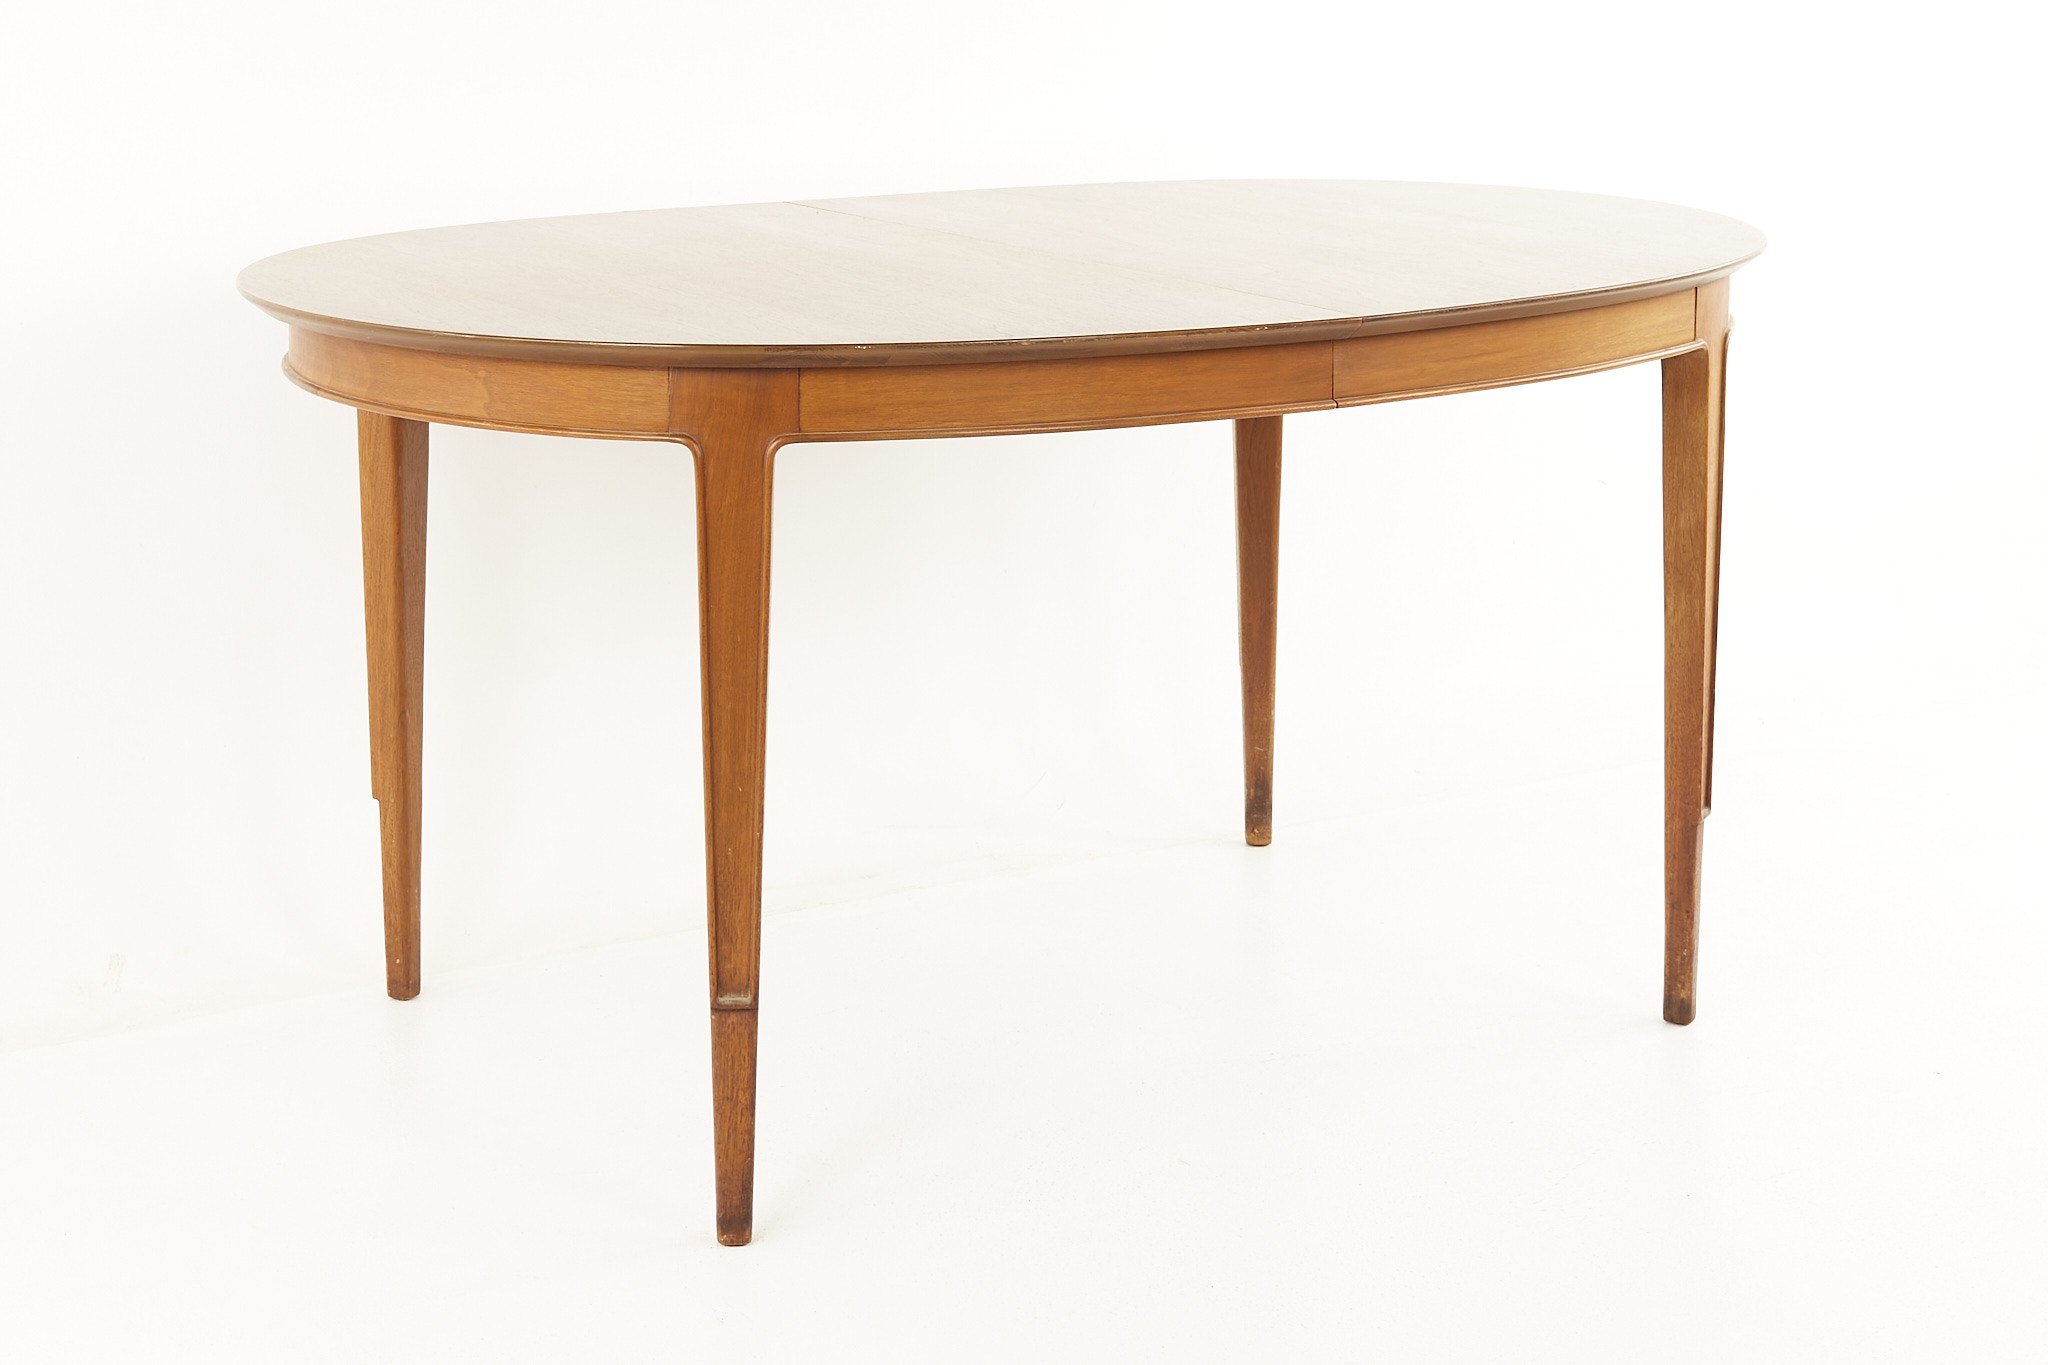 Mount Airy Janus Mid Century Dining Table with 2 Leaves